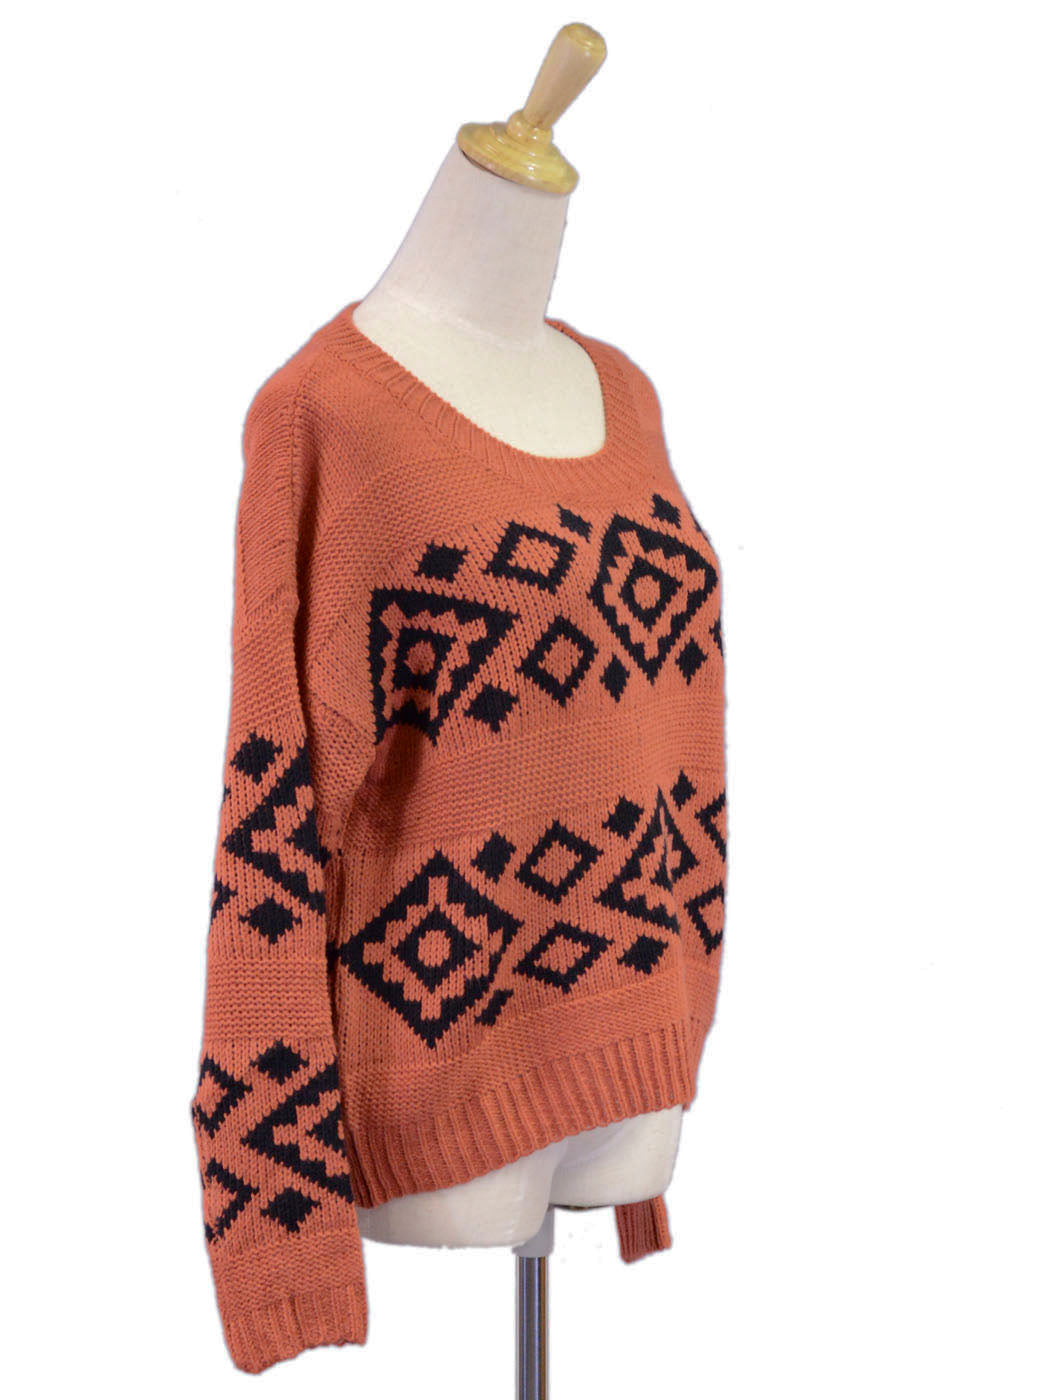 Cotton Candy Orange Cropped Scoop Neckline Diamond Long Sleeved Knitted Jumper - ALILANG.COM